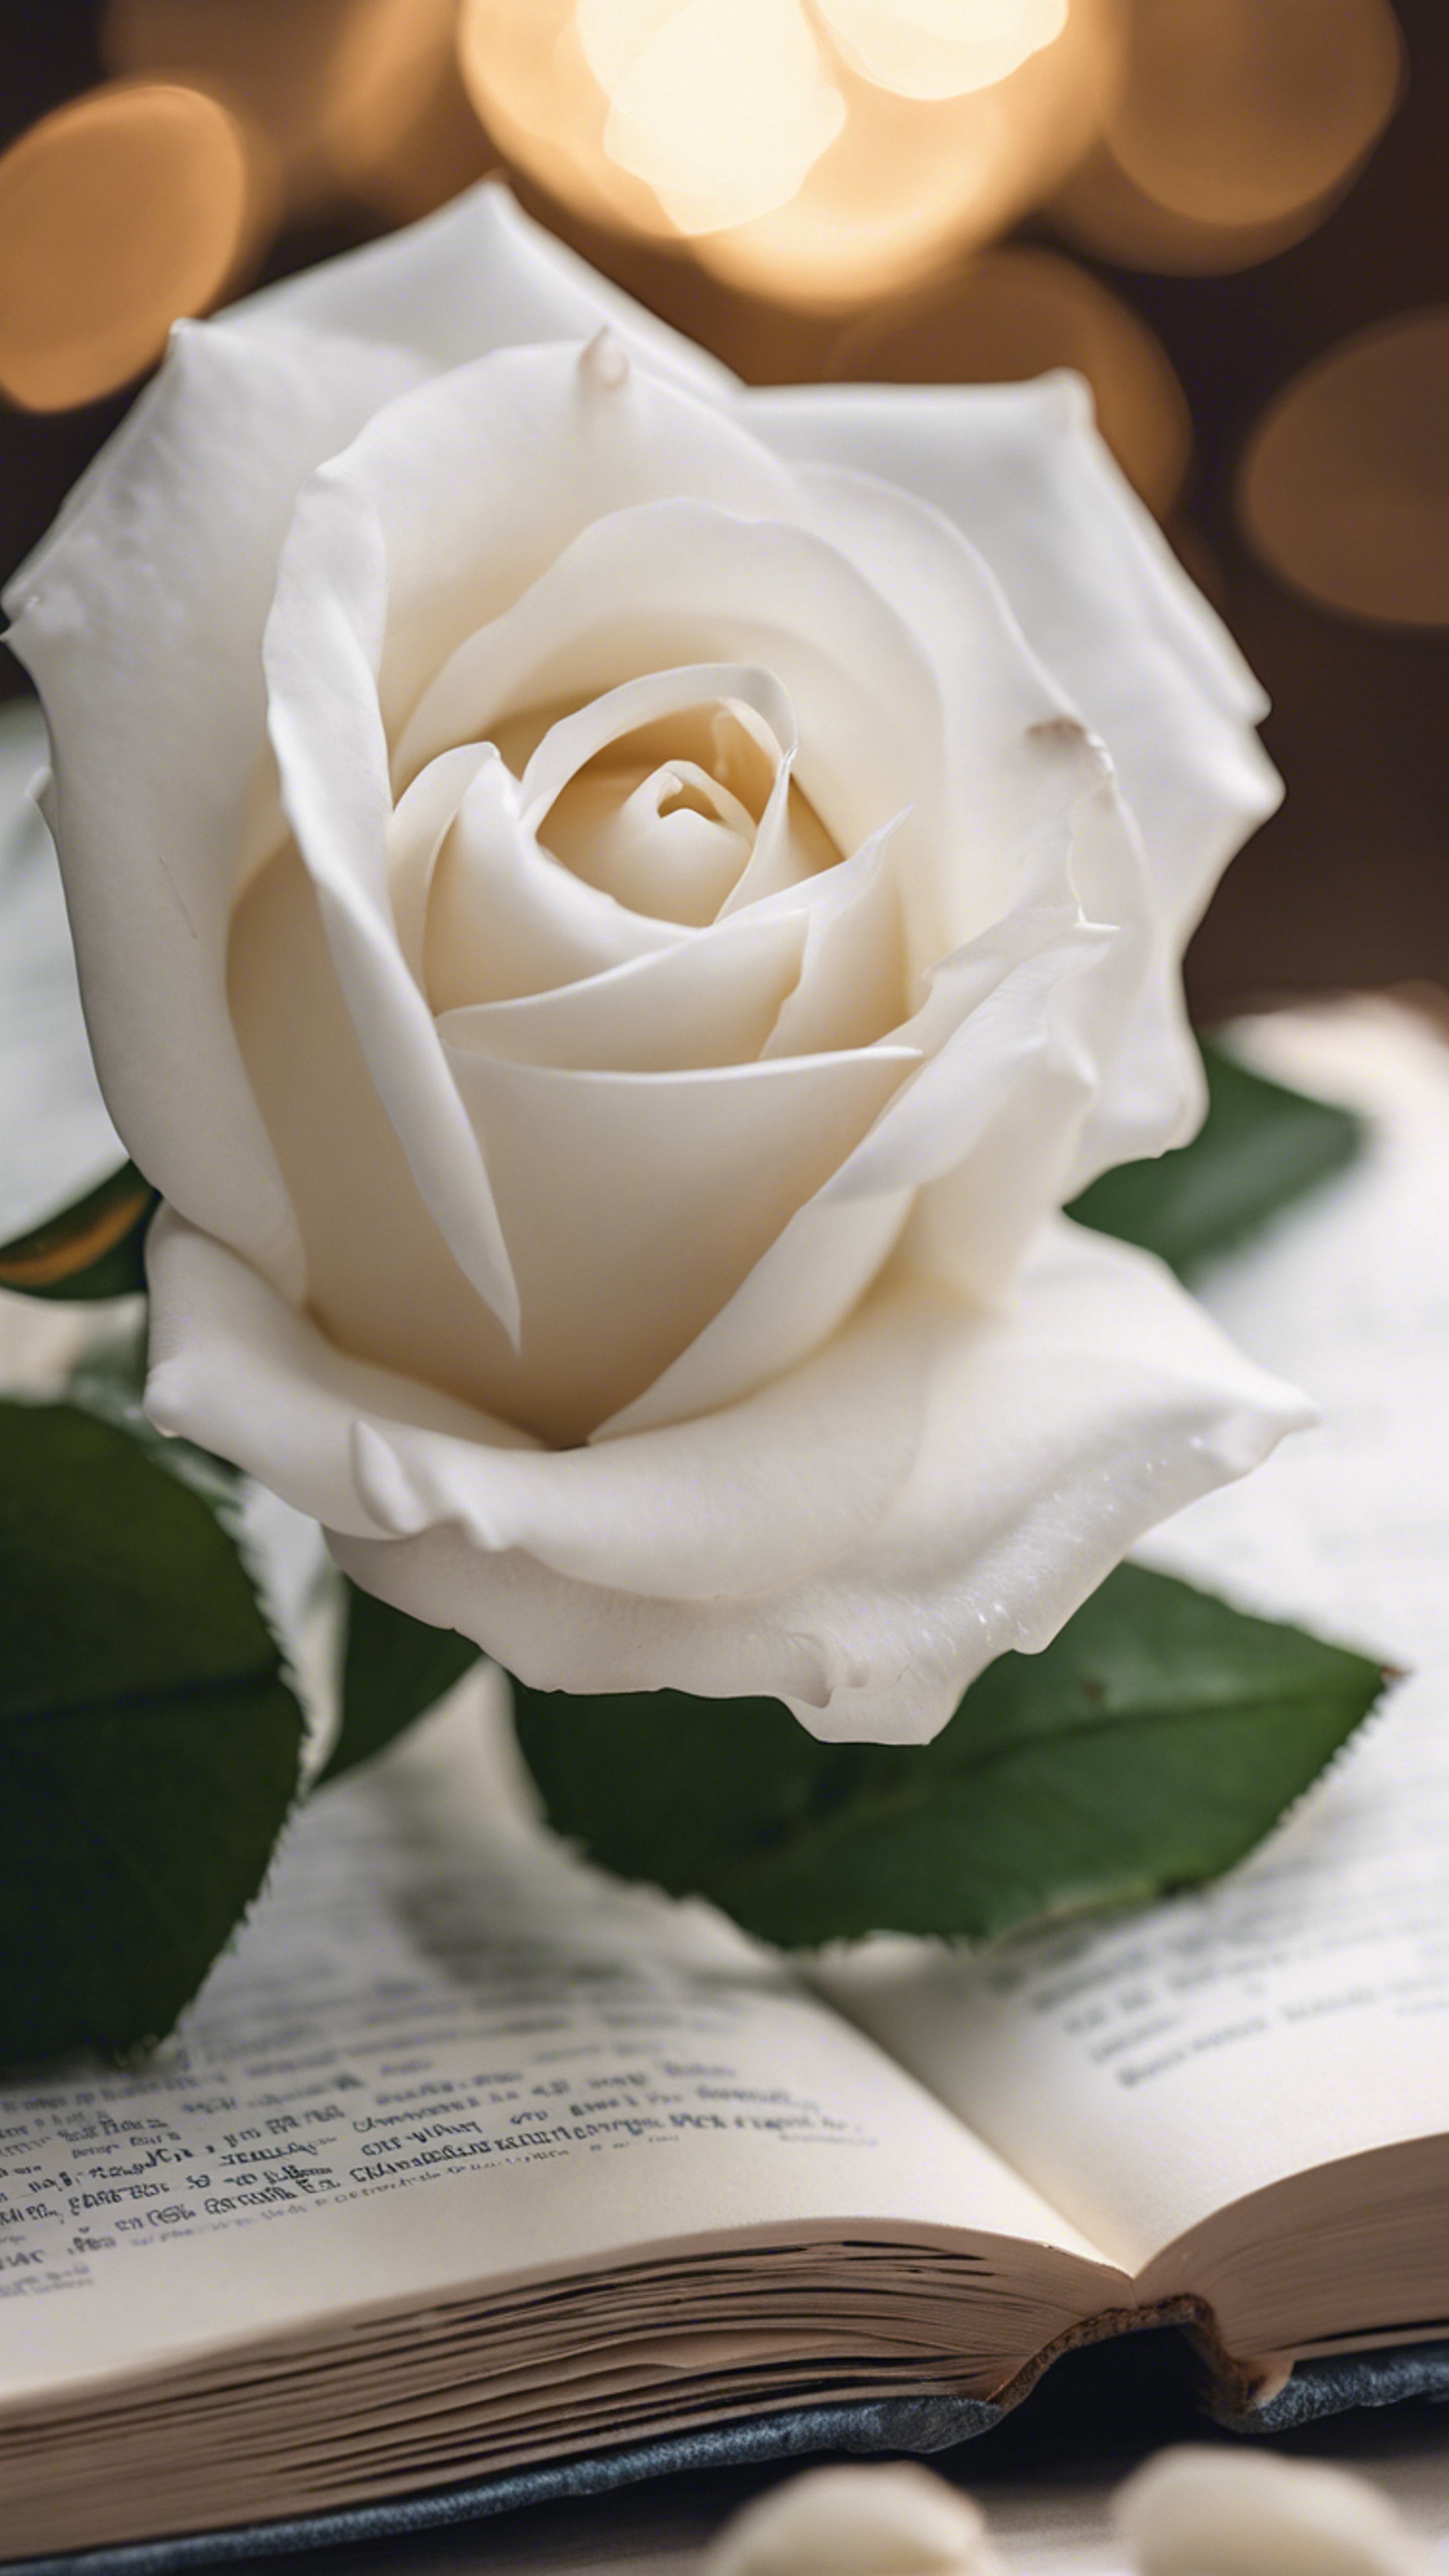 A serene white rose perched on an open hardcover book. Tapeta[5eeaaa5d95634df1b3fb]